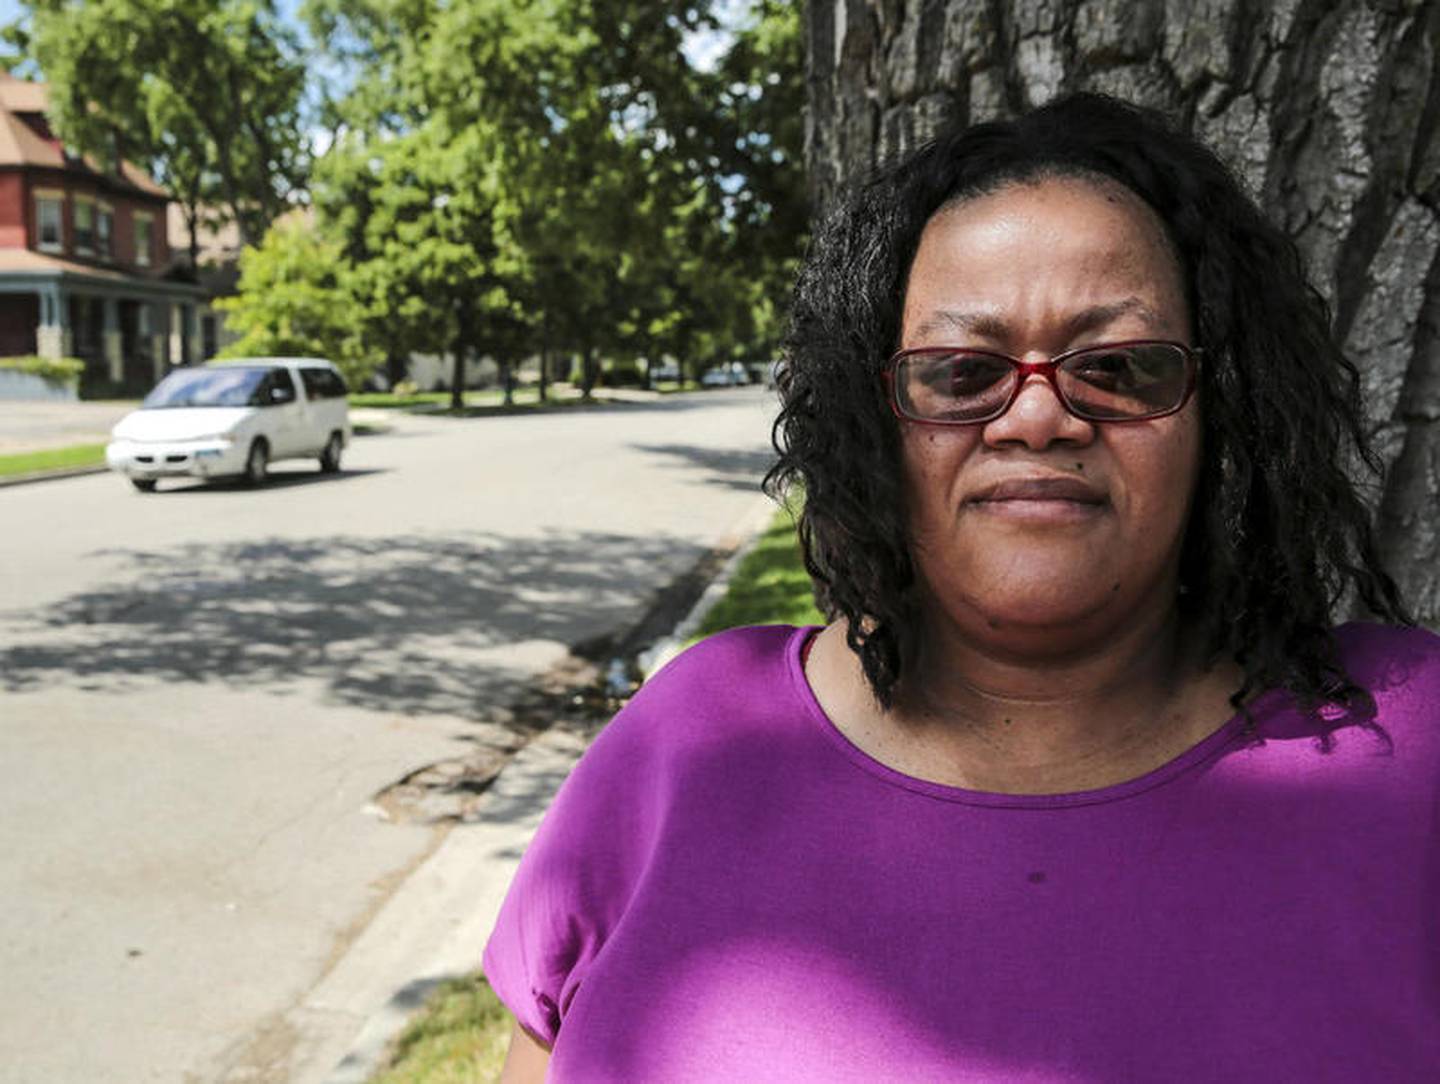 Konika Morrow stands along the curb where she was tackled by Joliet Police on Wednesday, July 10, 2019, in Joliet, Ill.